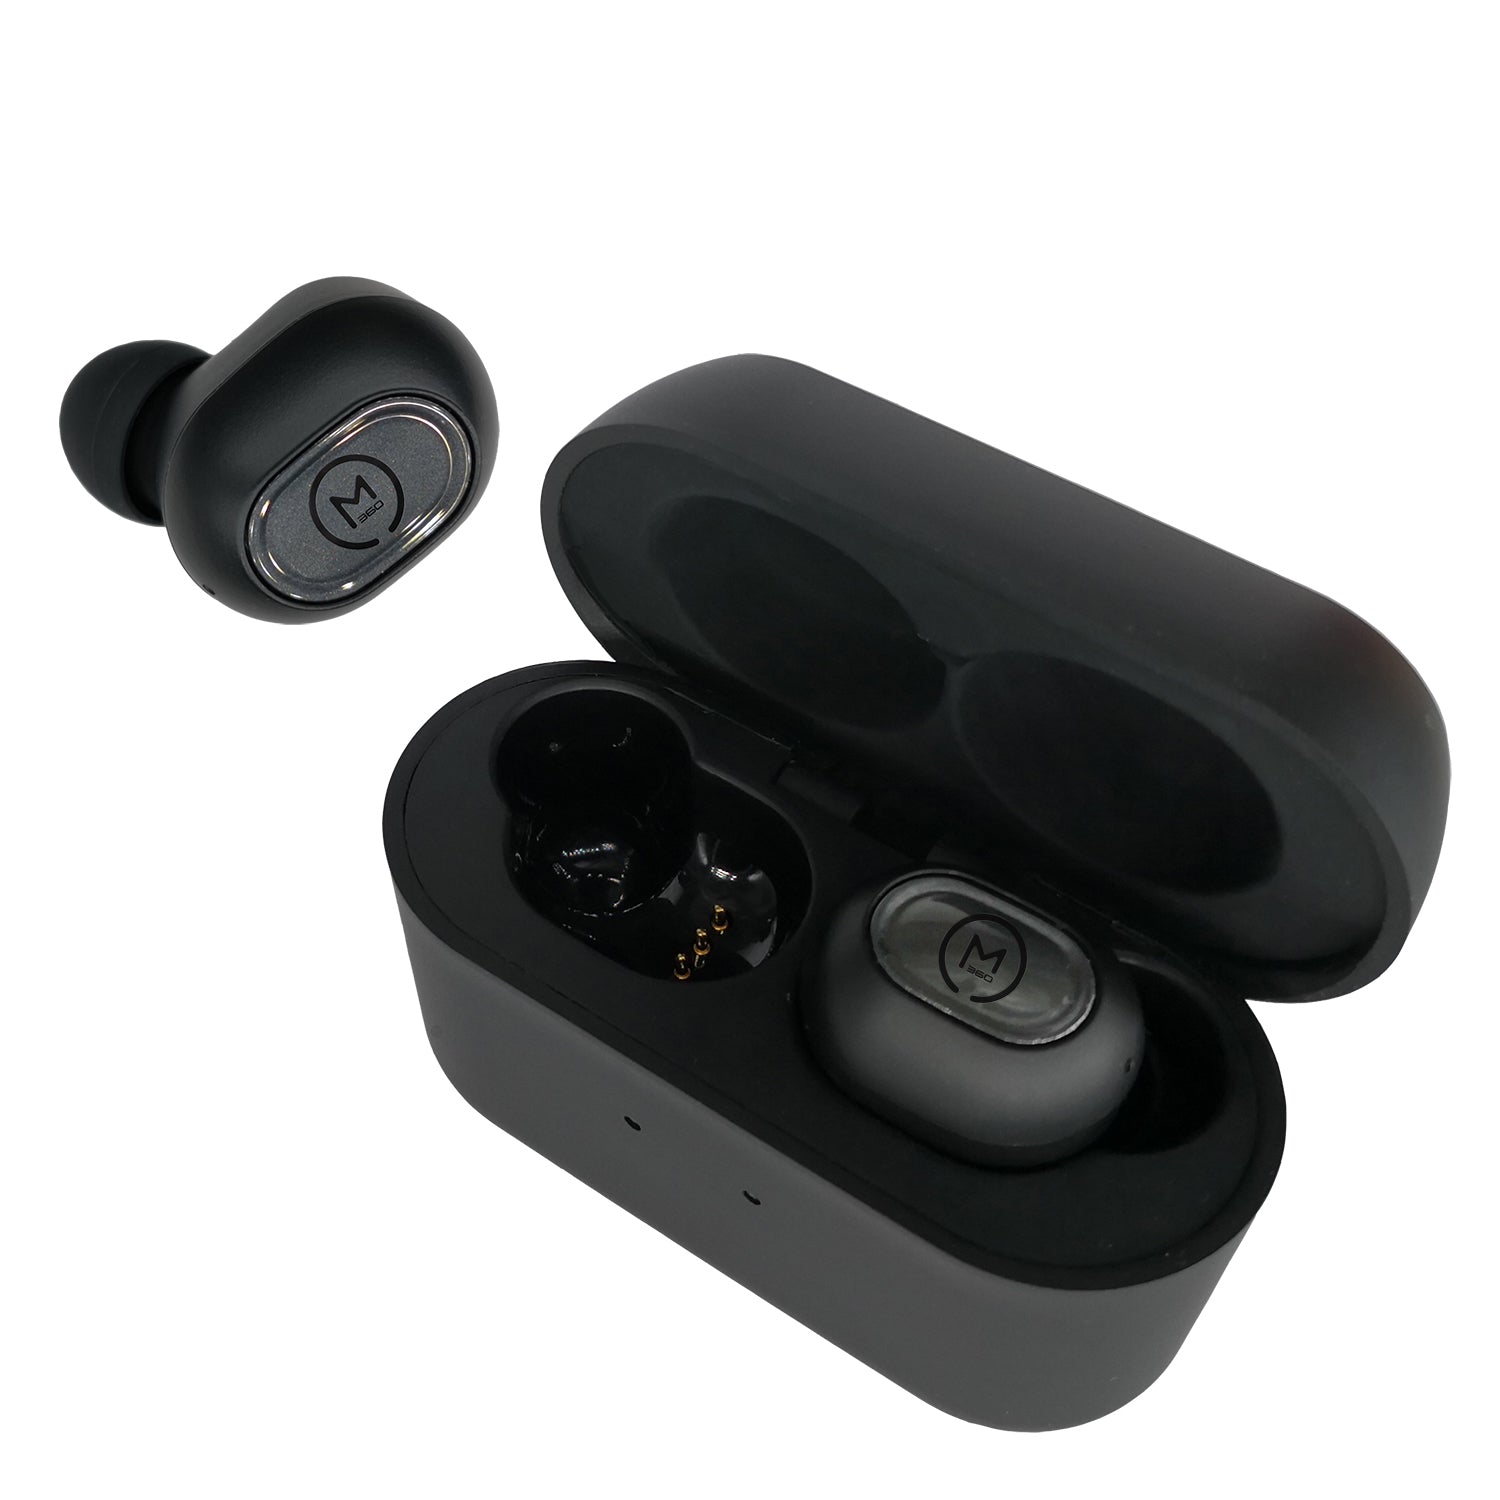 Photo of Morpheus 360 Pulse 360 True Wireless Earbuds. The photo displays a view from above the black button earbuds and charging case, the left earbud is out of the charging case while the right earbud is resting in the charging case.